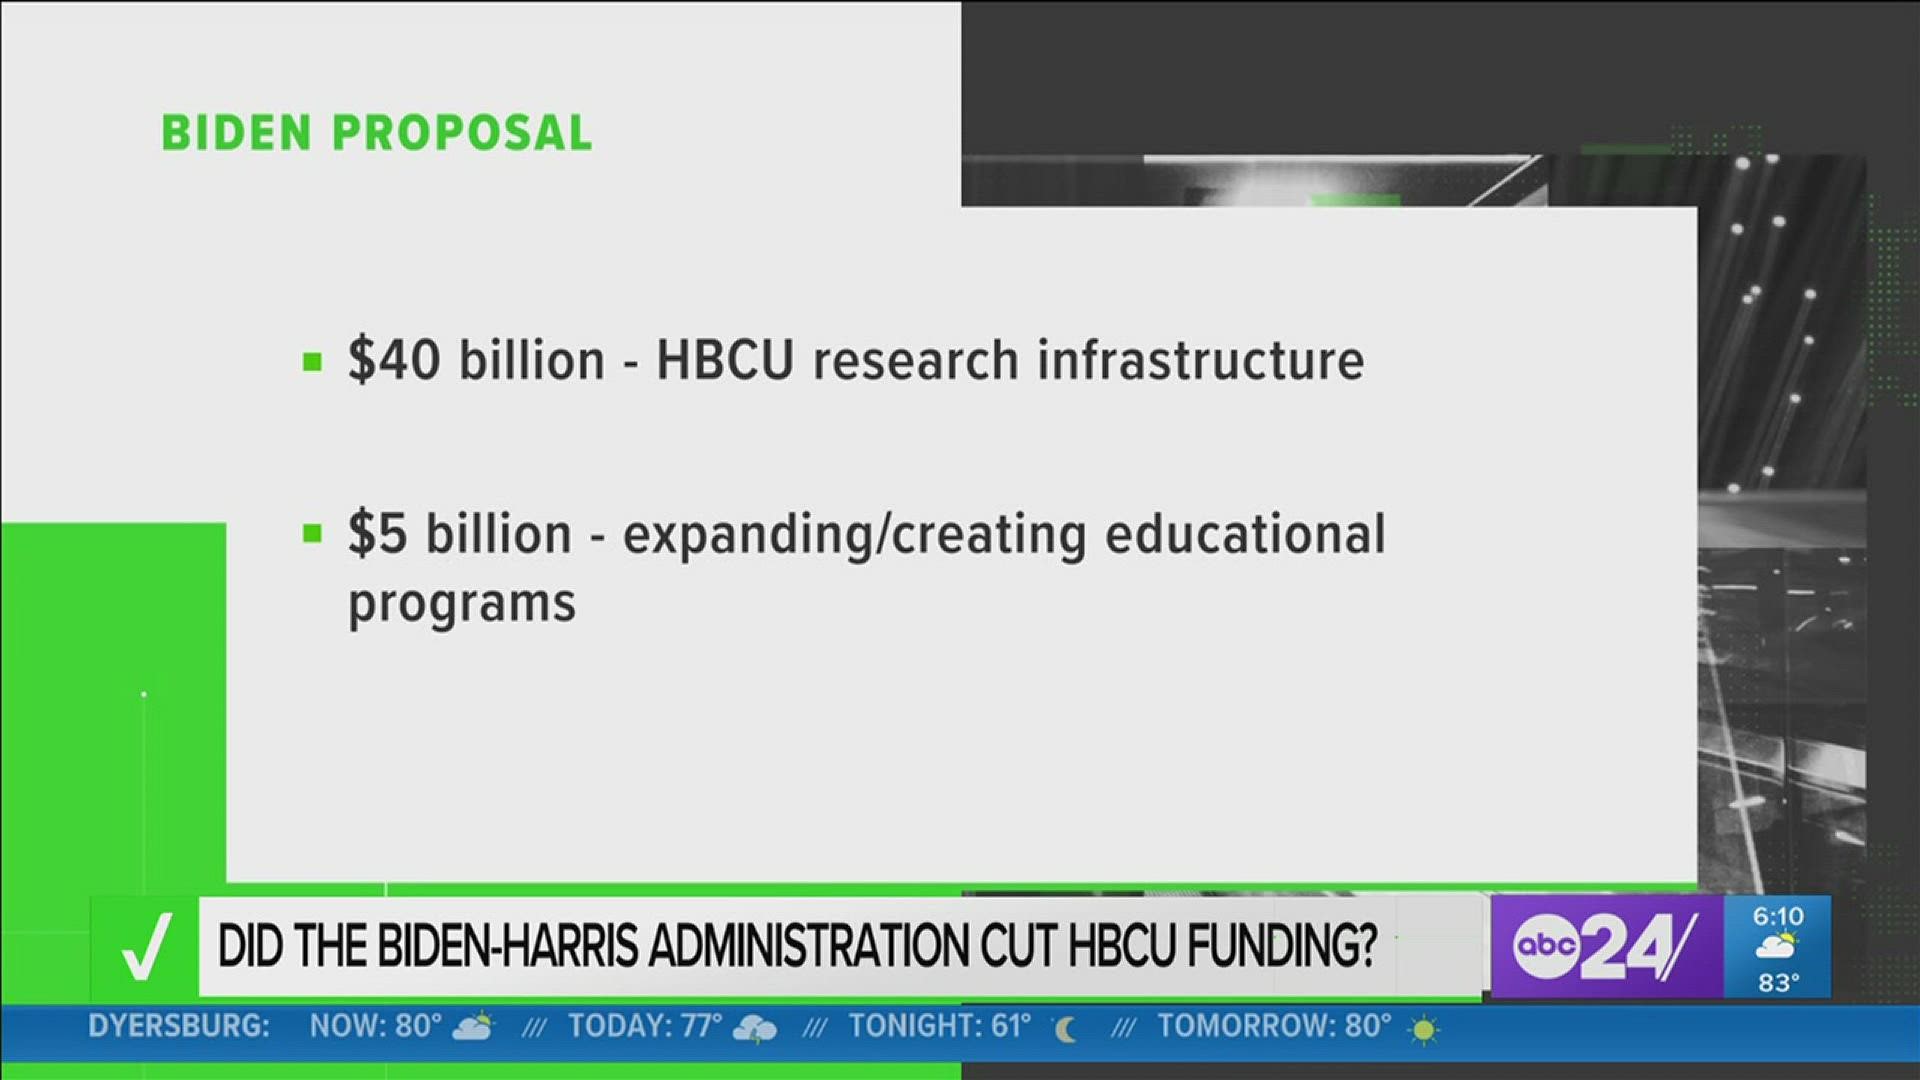 We checked whether recent reports were accurate that funding was being cut for HBCUs - from $45 billion to just $2 billion.